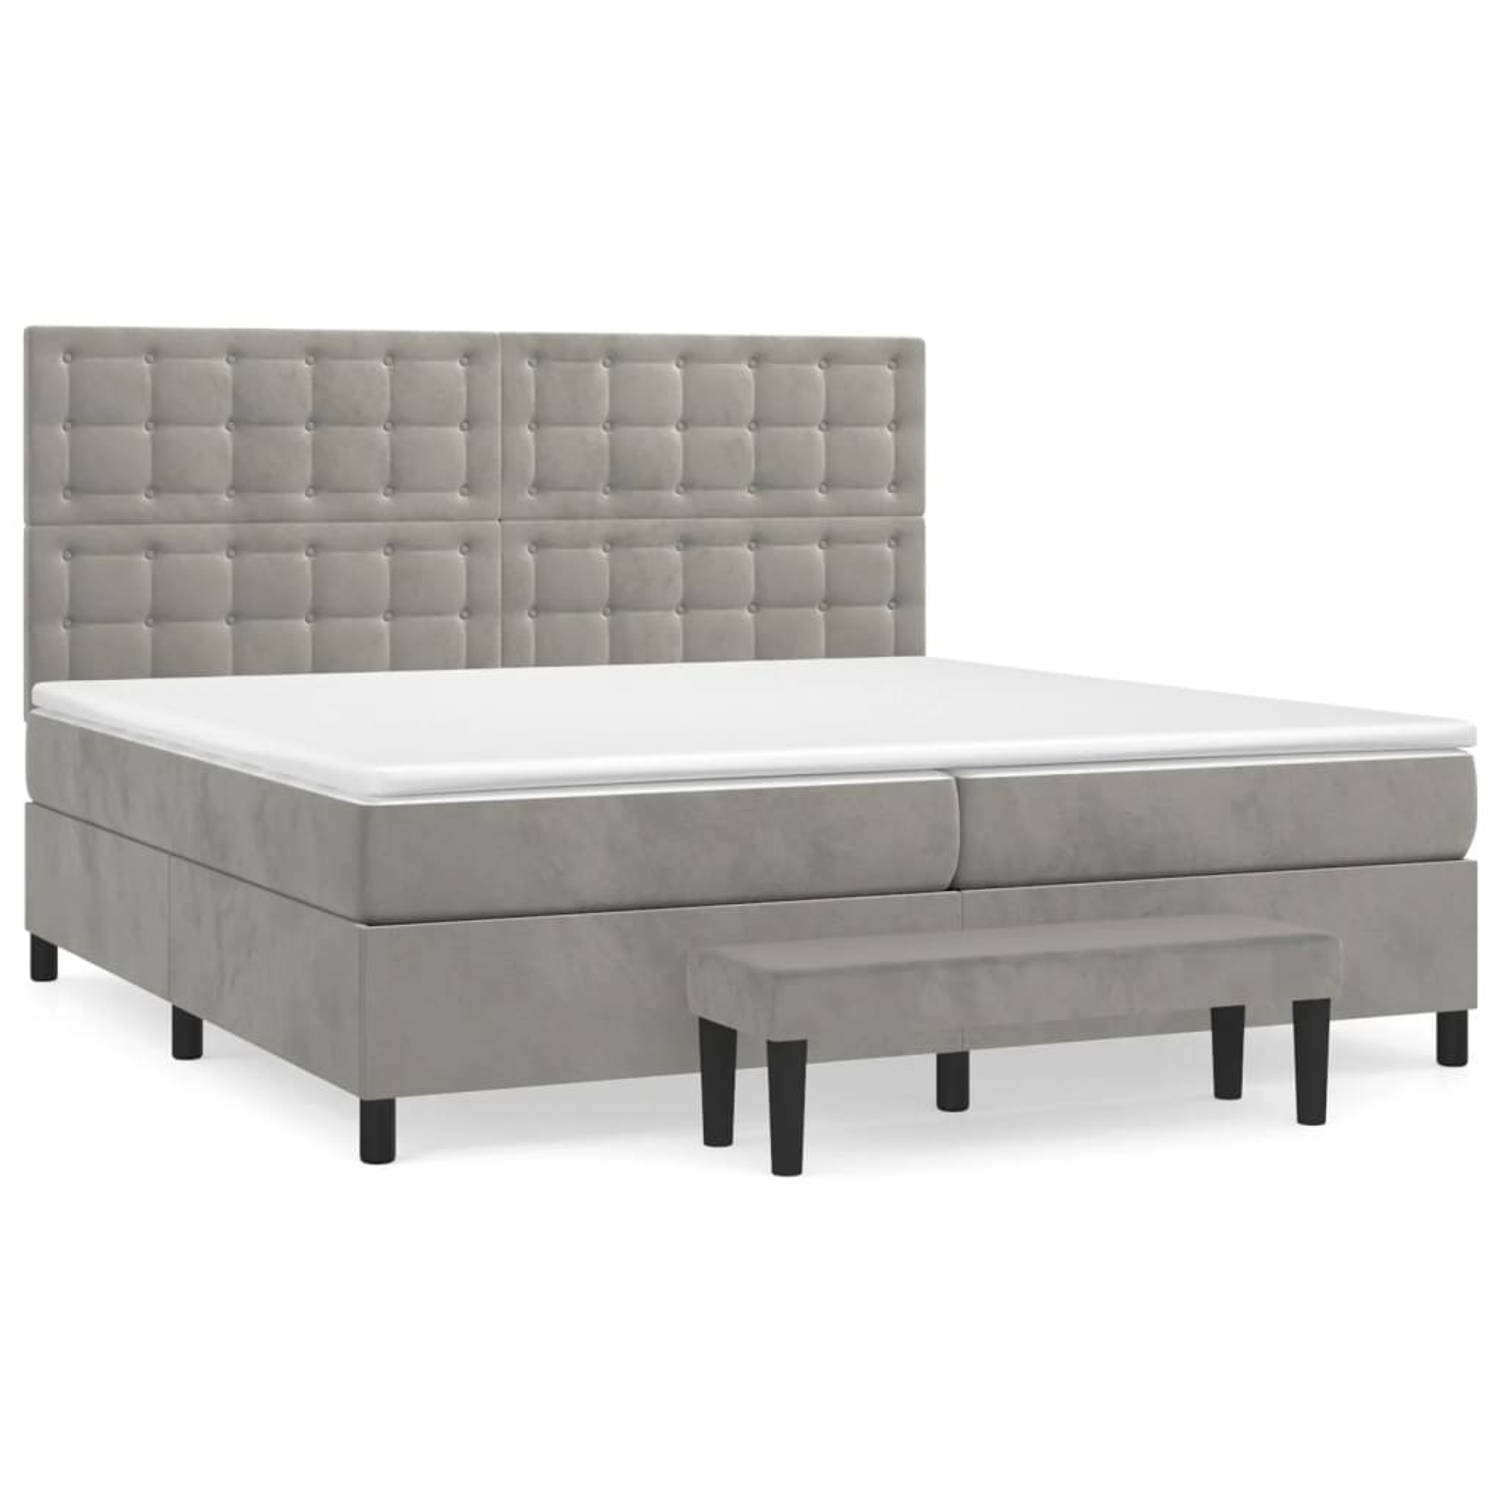 The Living Store Bed The Living Store Boxspring Bed 203x200x118/128 cm - Lichtgrijs - Fluwelen stof